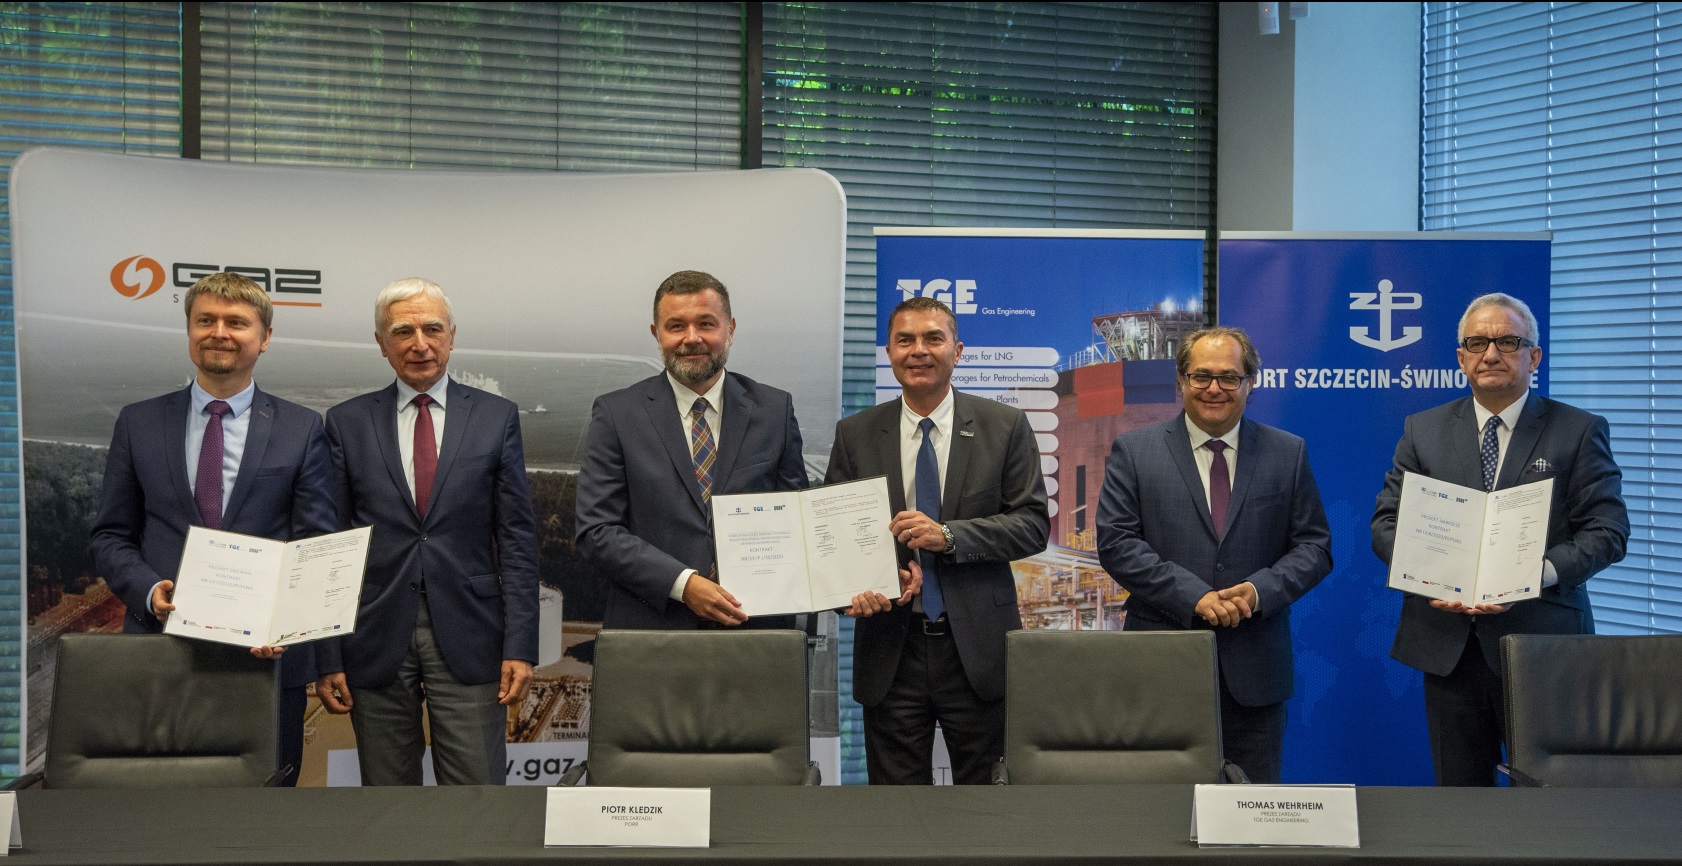 Szczecin and Świnoujście Seaports: The Contractor for the extension of the LNG Terminal selected - MarinePoland.com